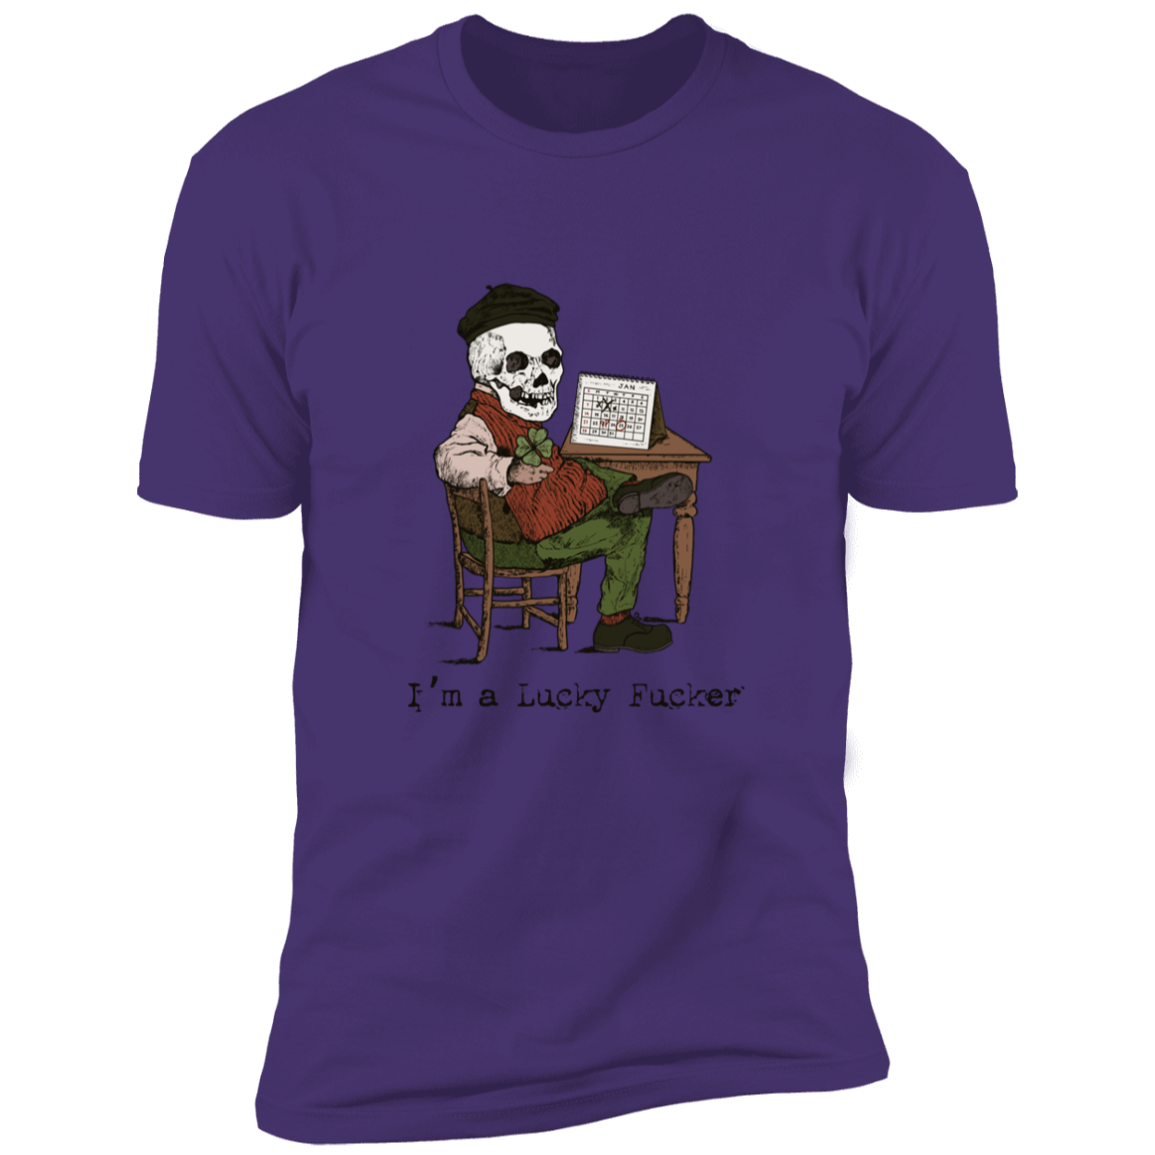 Lucky Fucker Bargain Tee - Choose from 10 colors